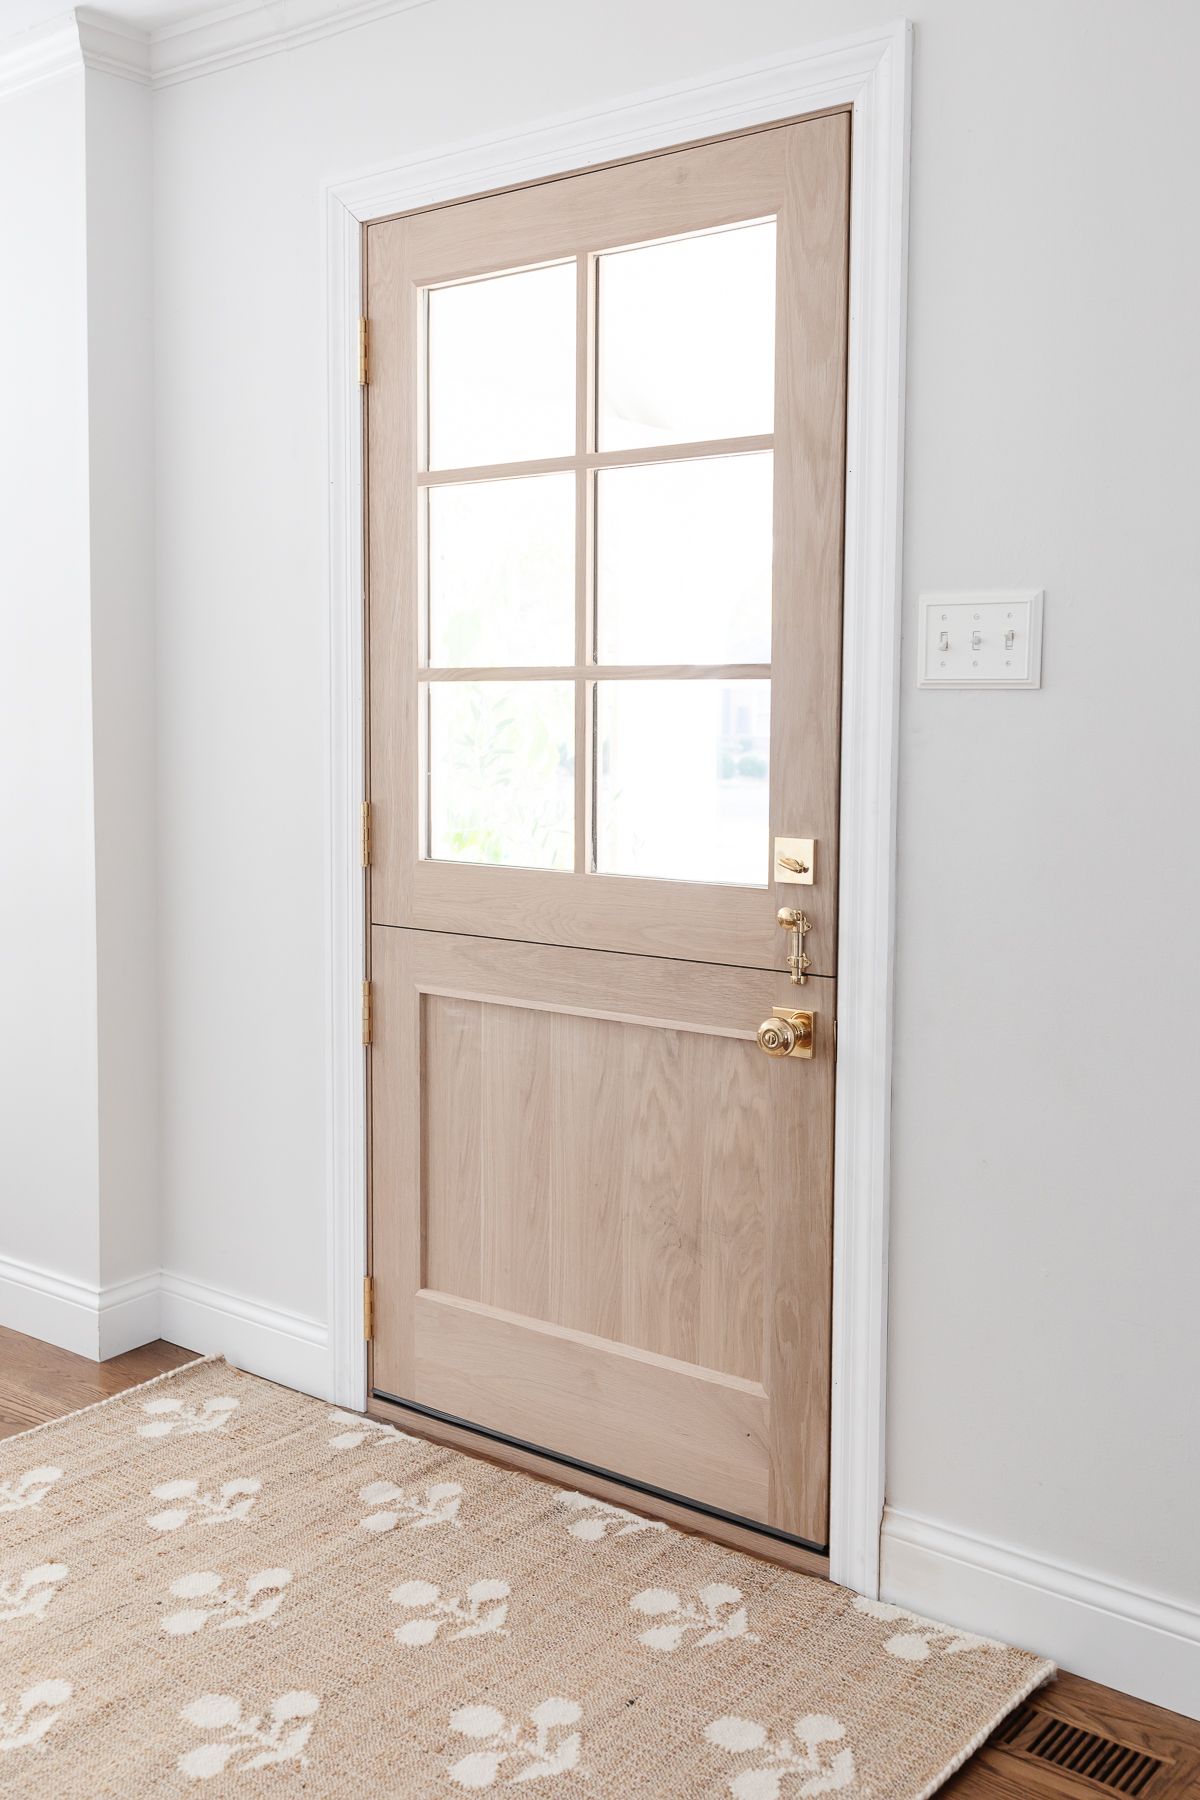 A soft wood dutch door in a white entryway, open to the outdoors